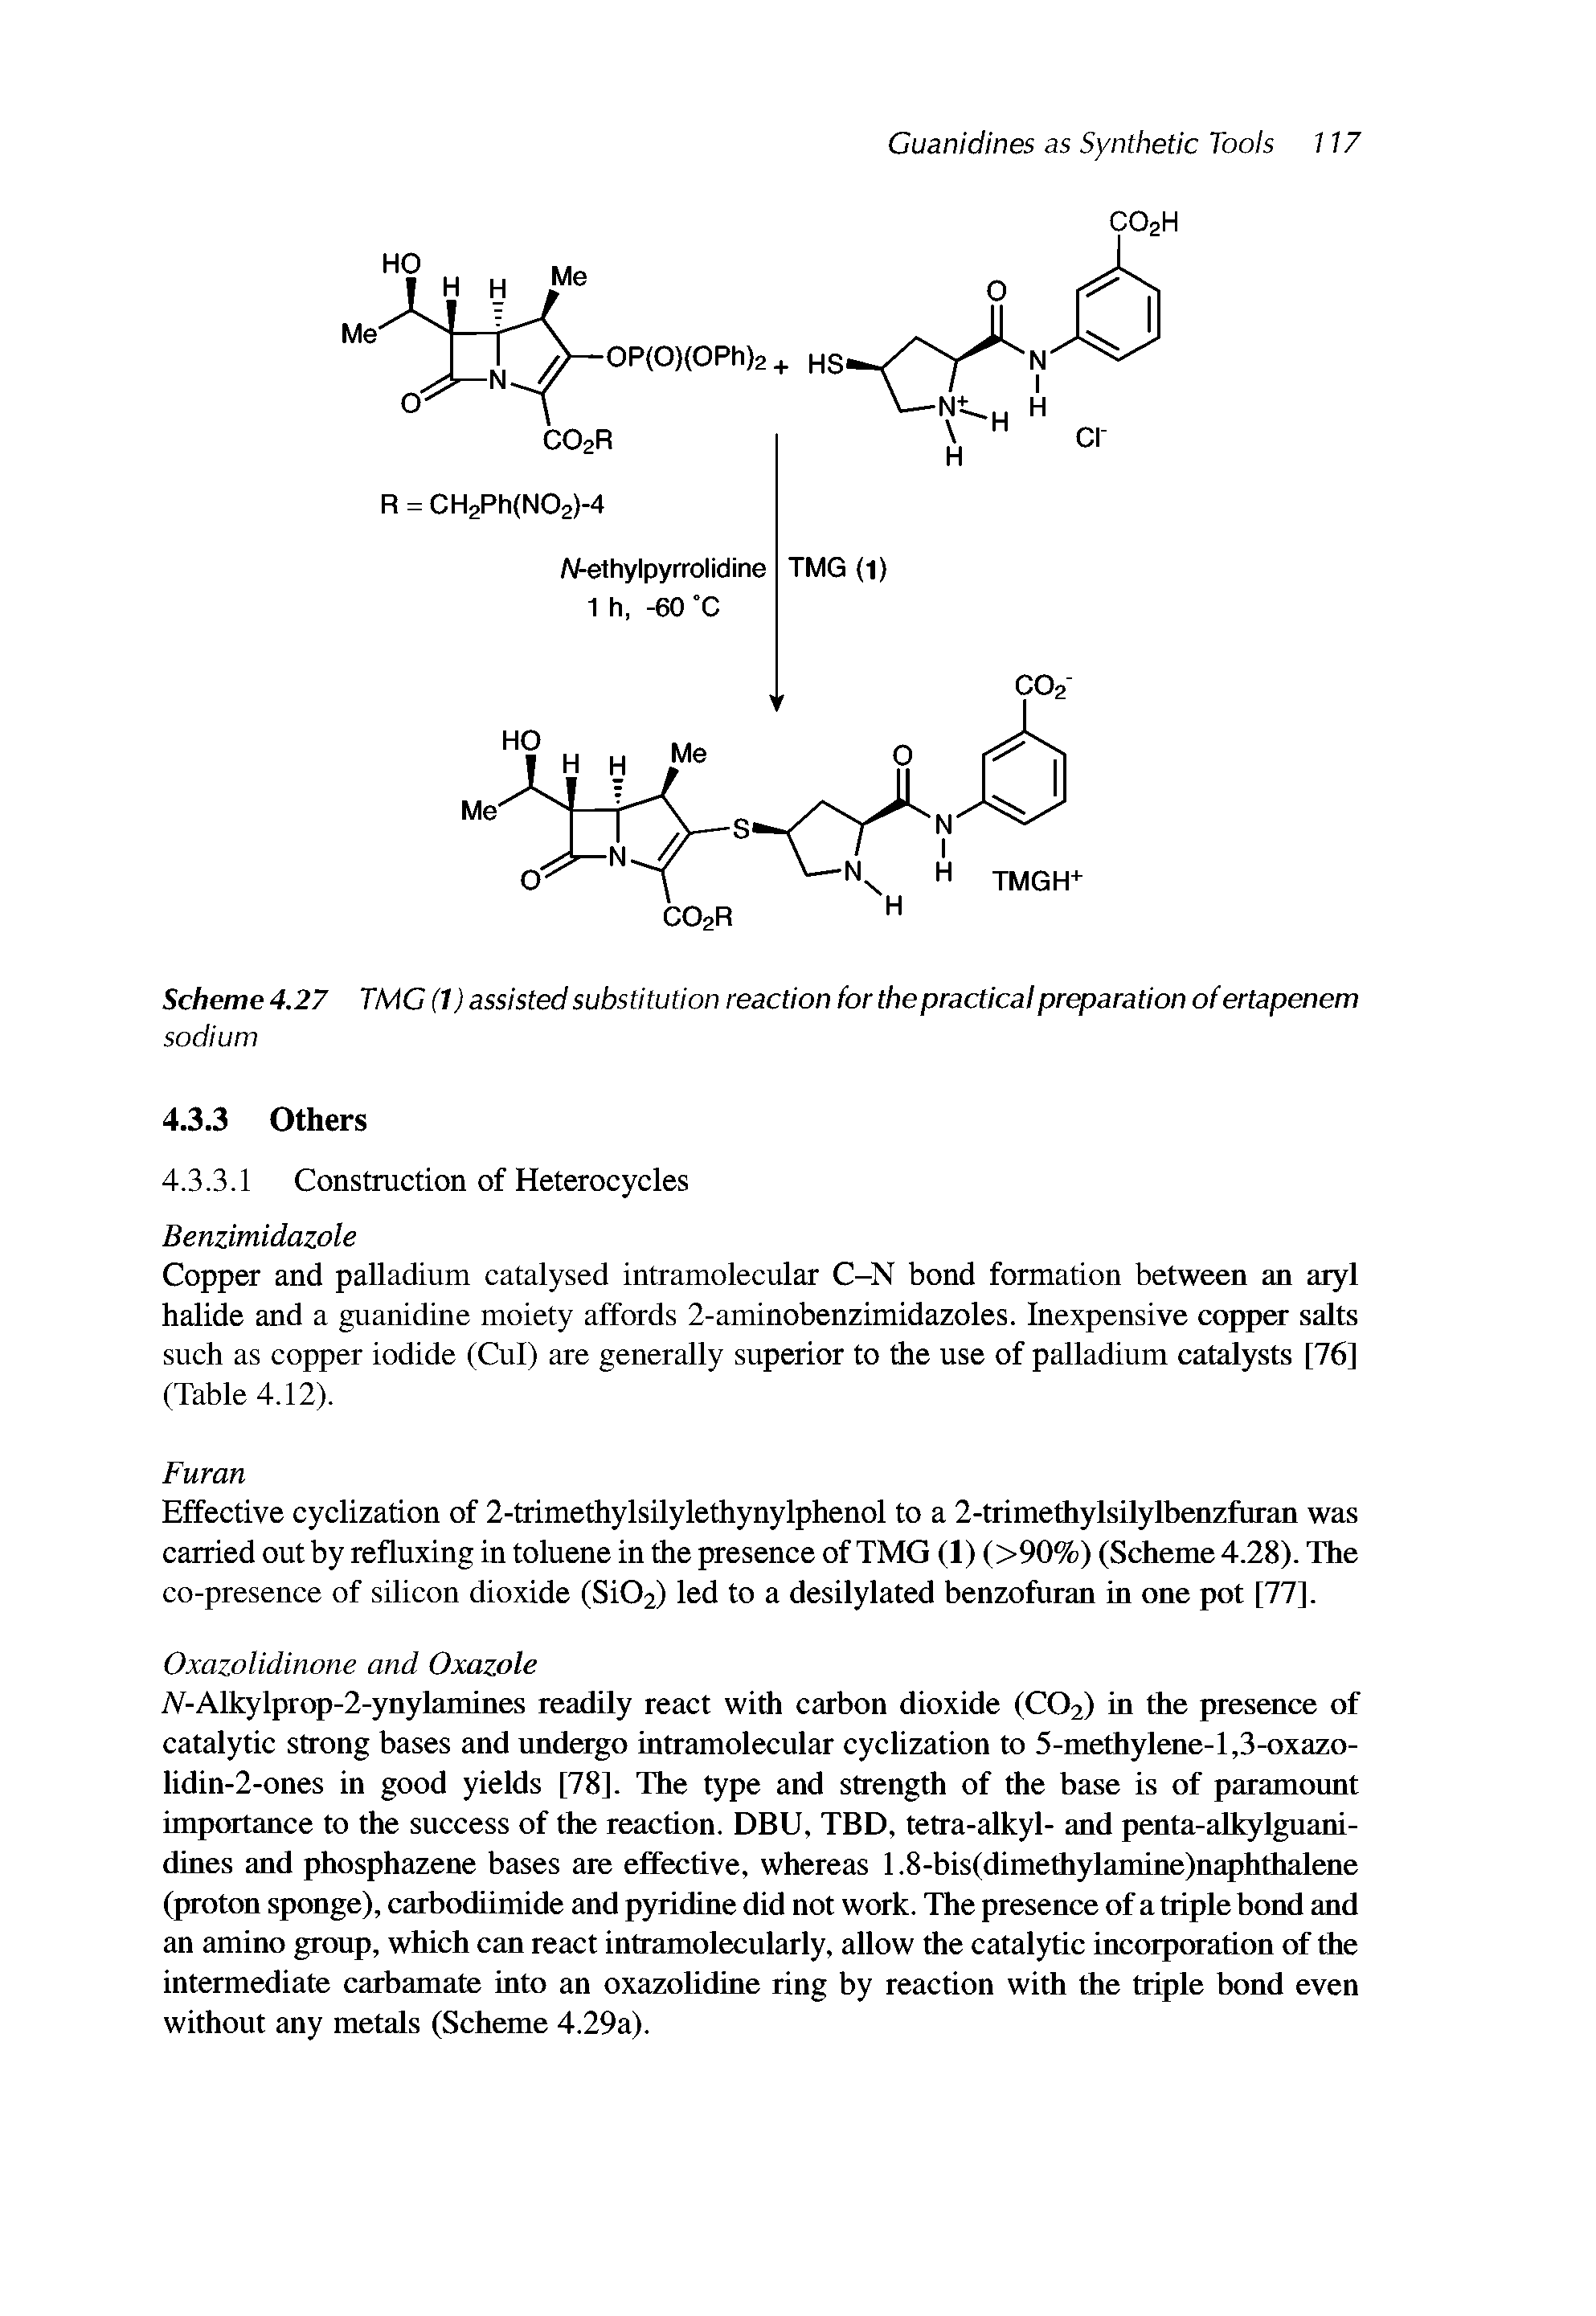 Scheme 4.27 TMG(1) assisted substitution reaction for the practical preparation of ertapenem...